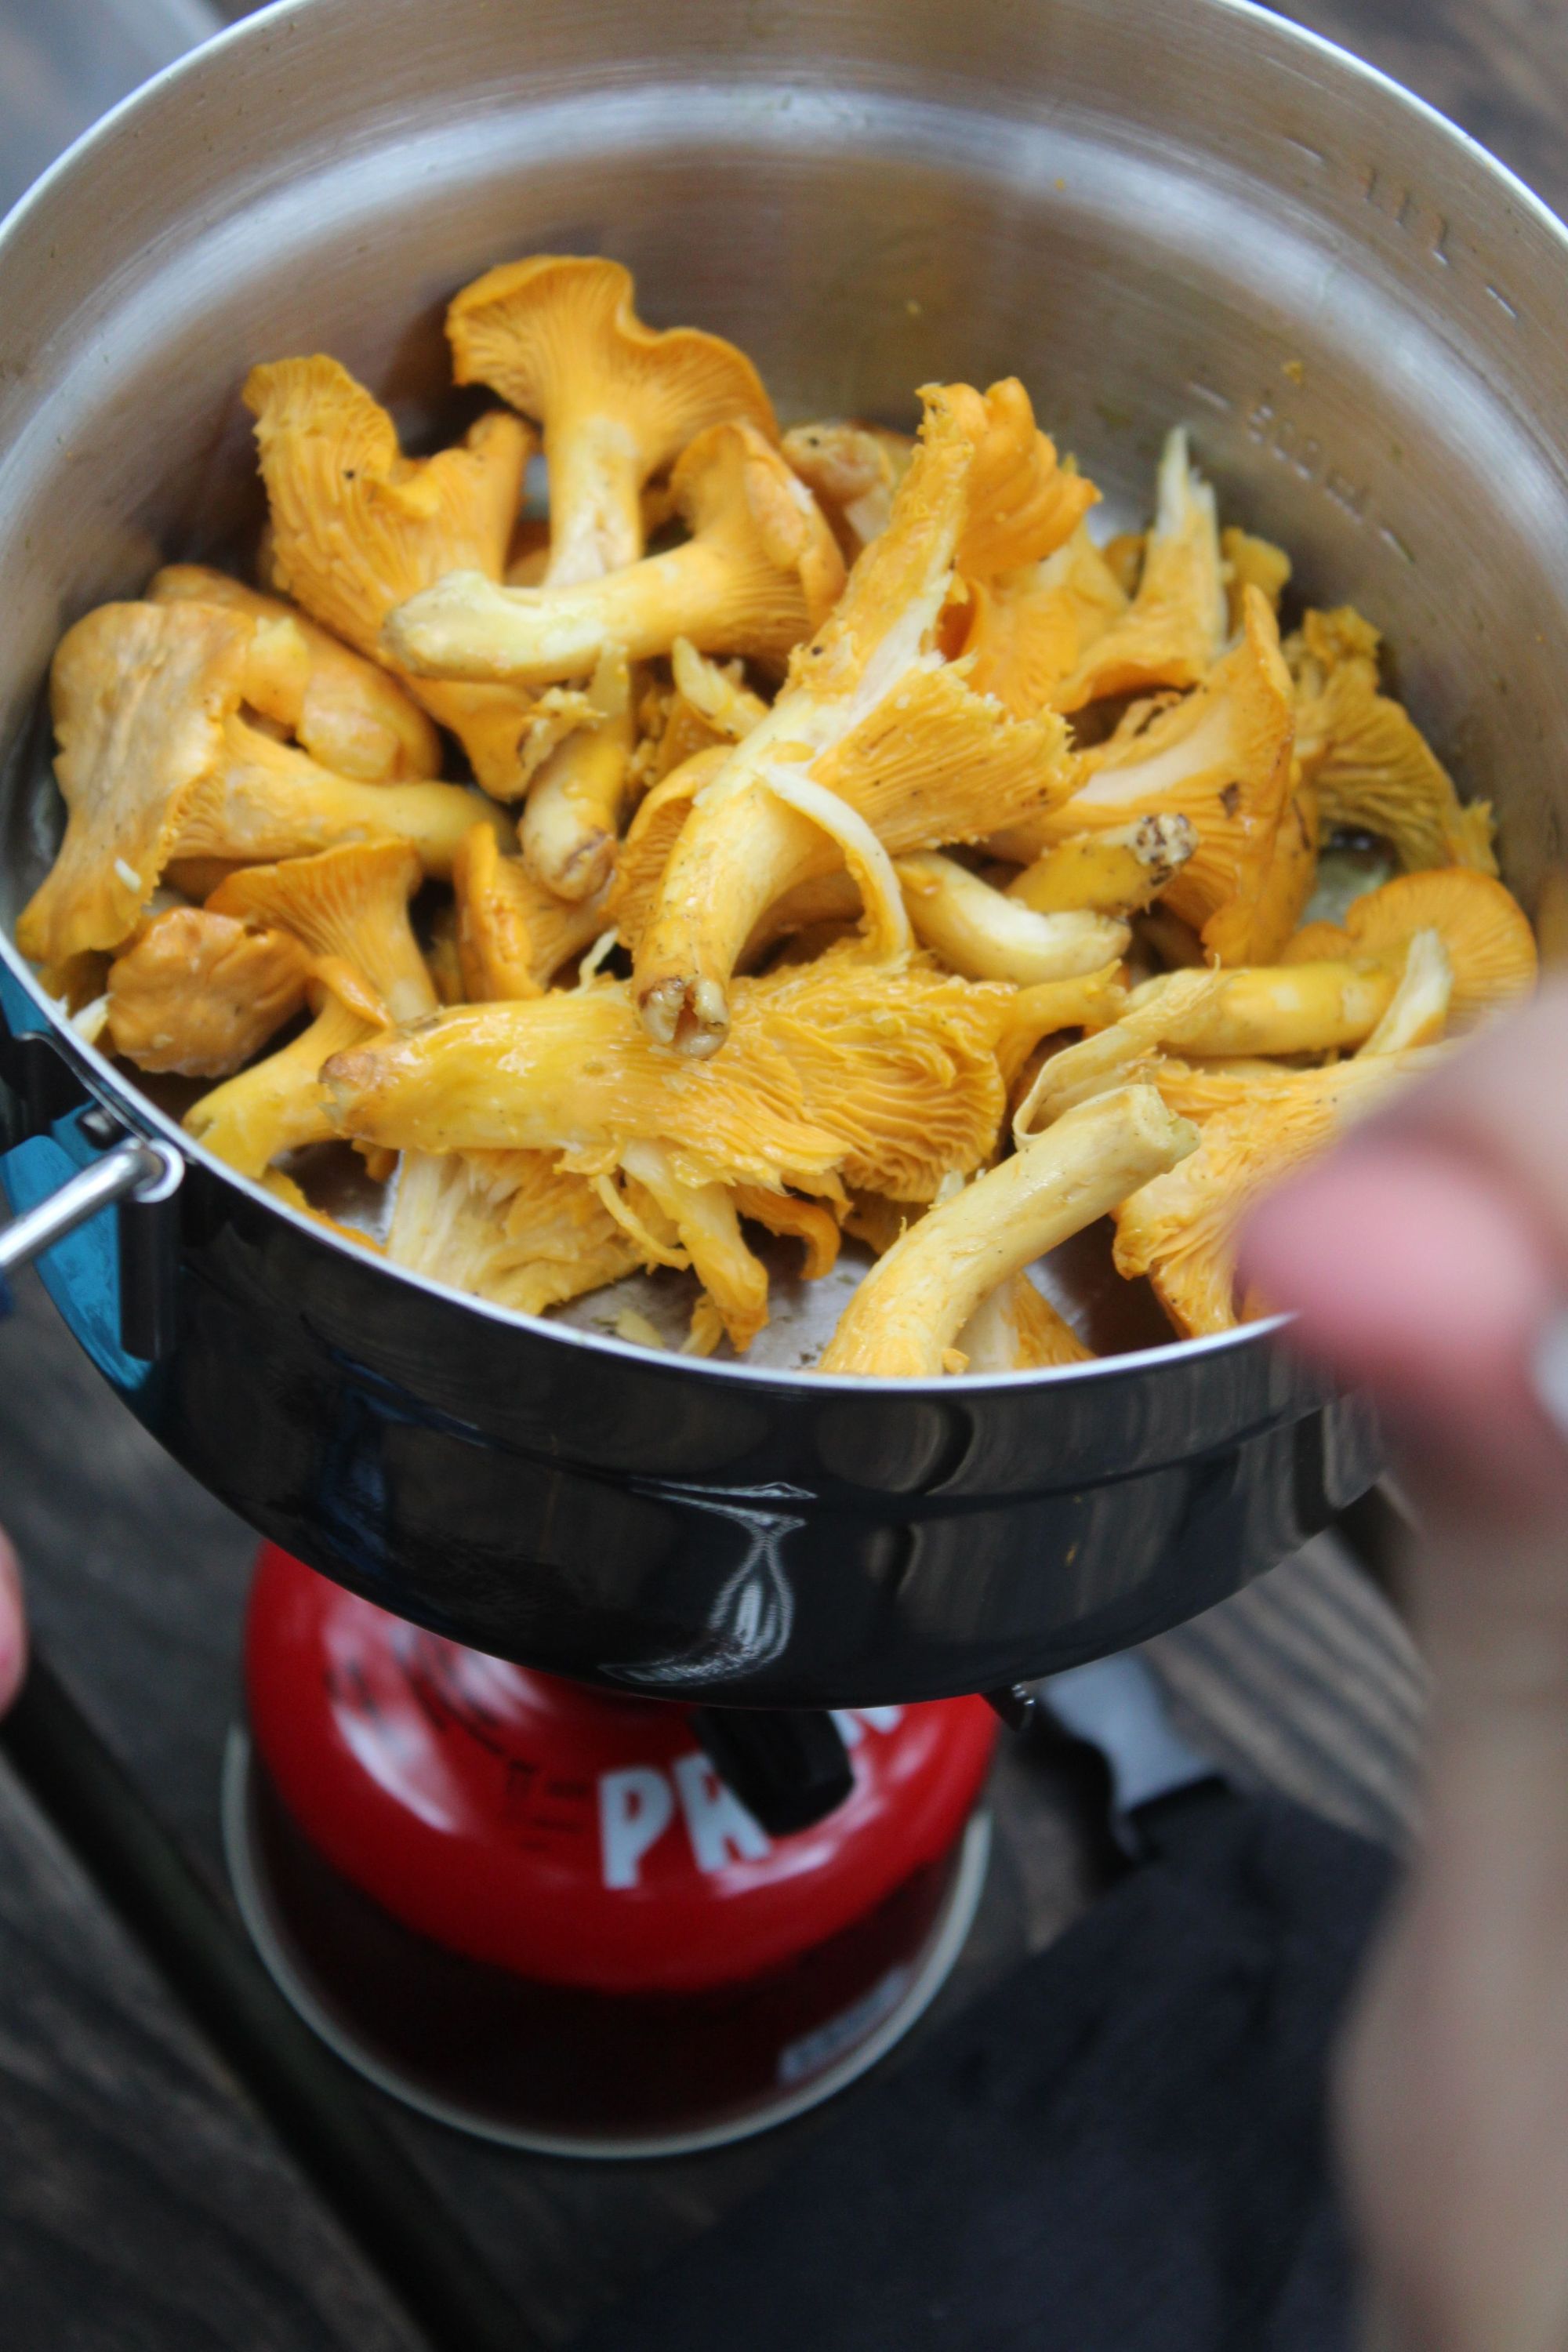 Chanterelle mushrooms picked in the Scottish Highlands, and cooked up as an October snack